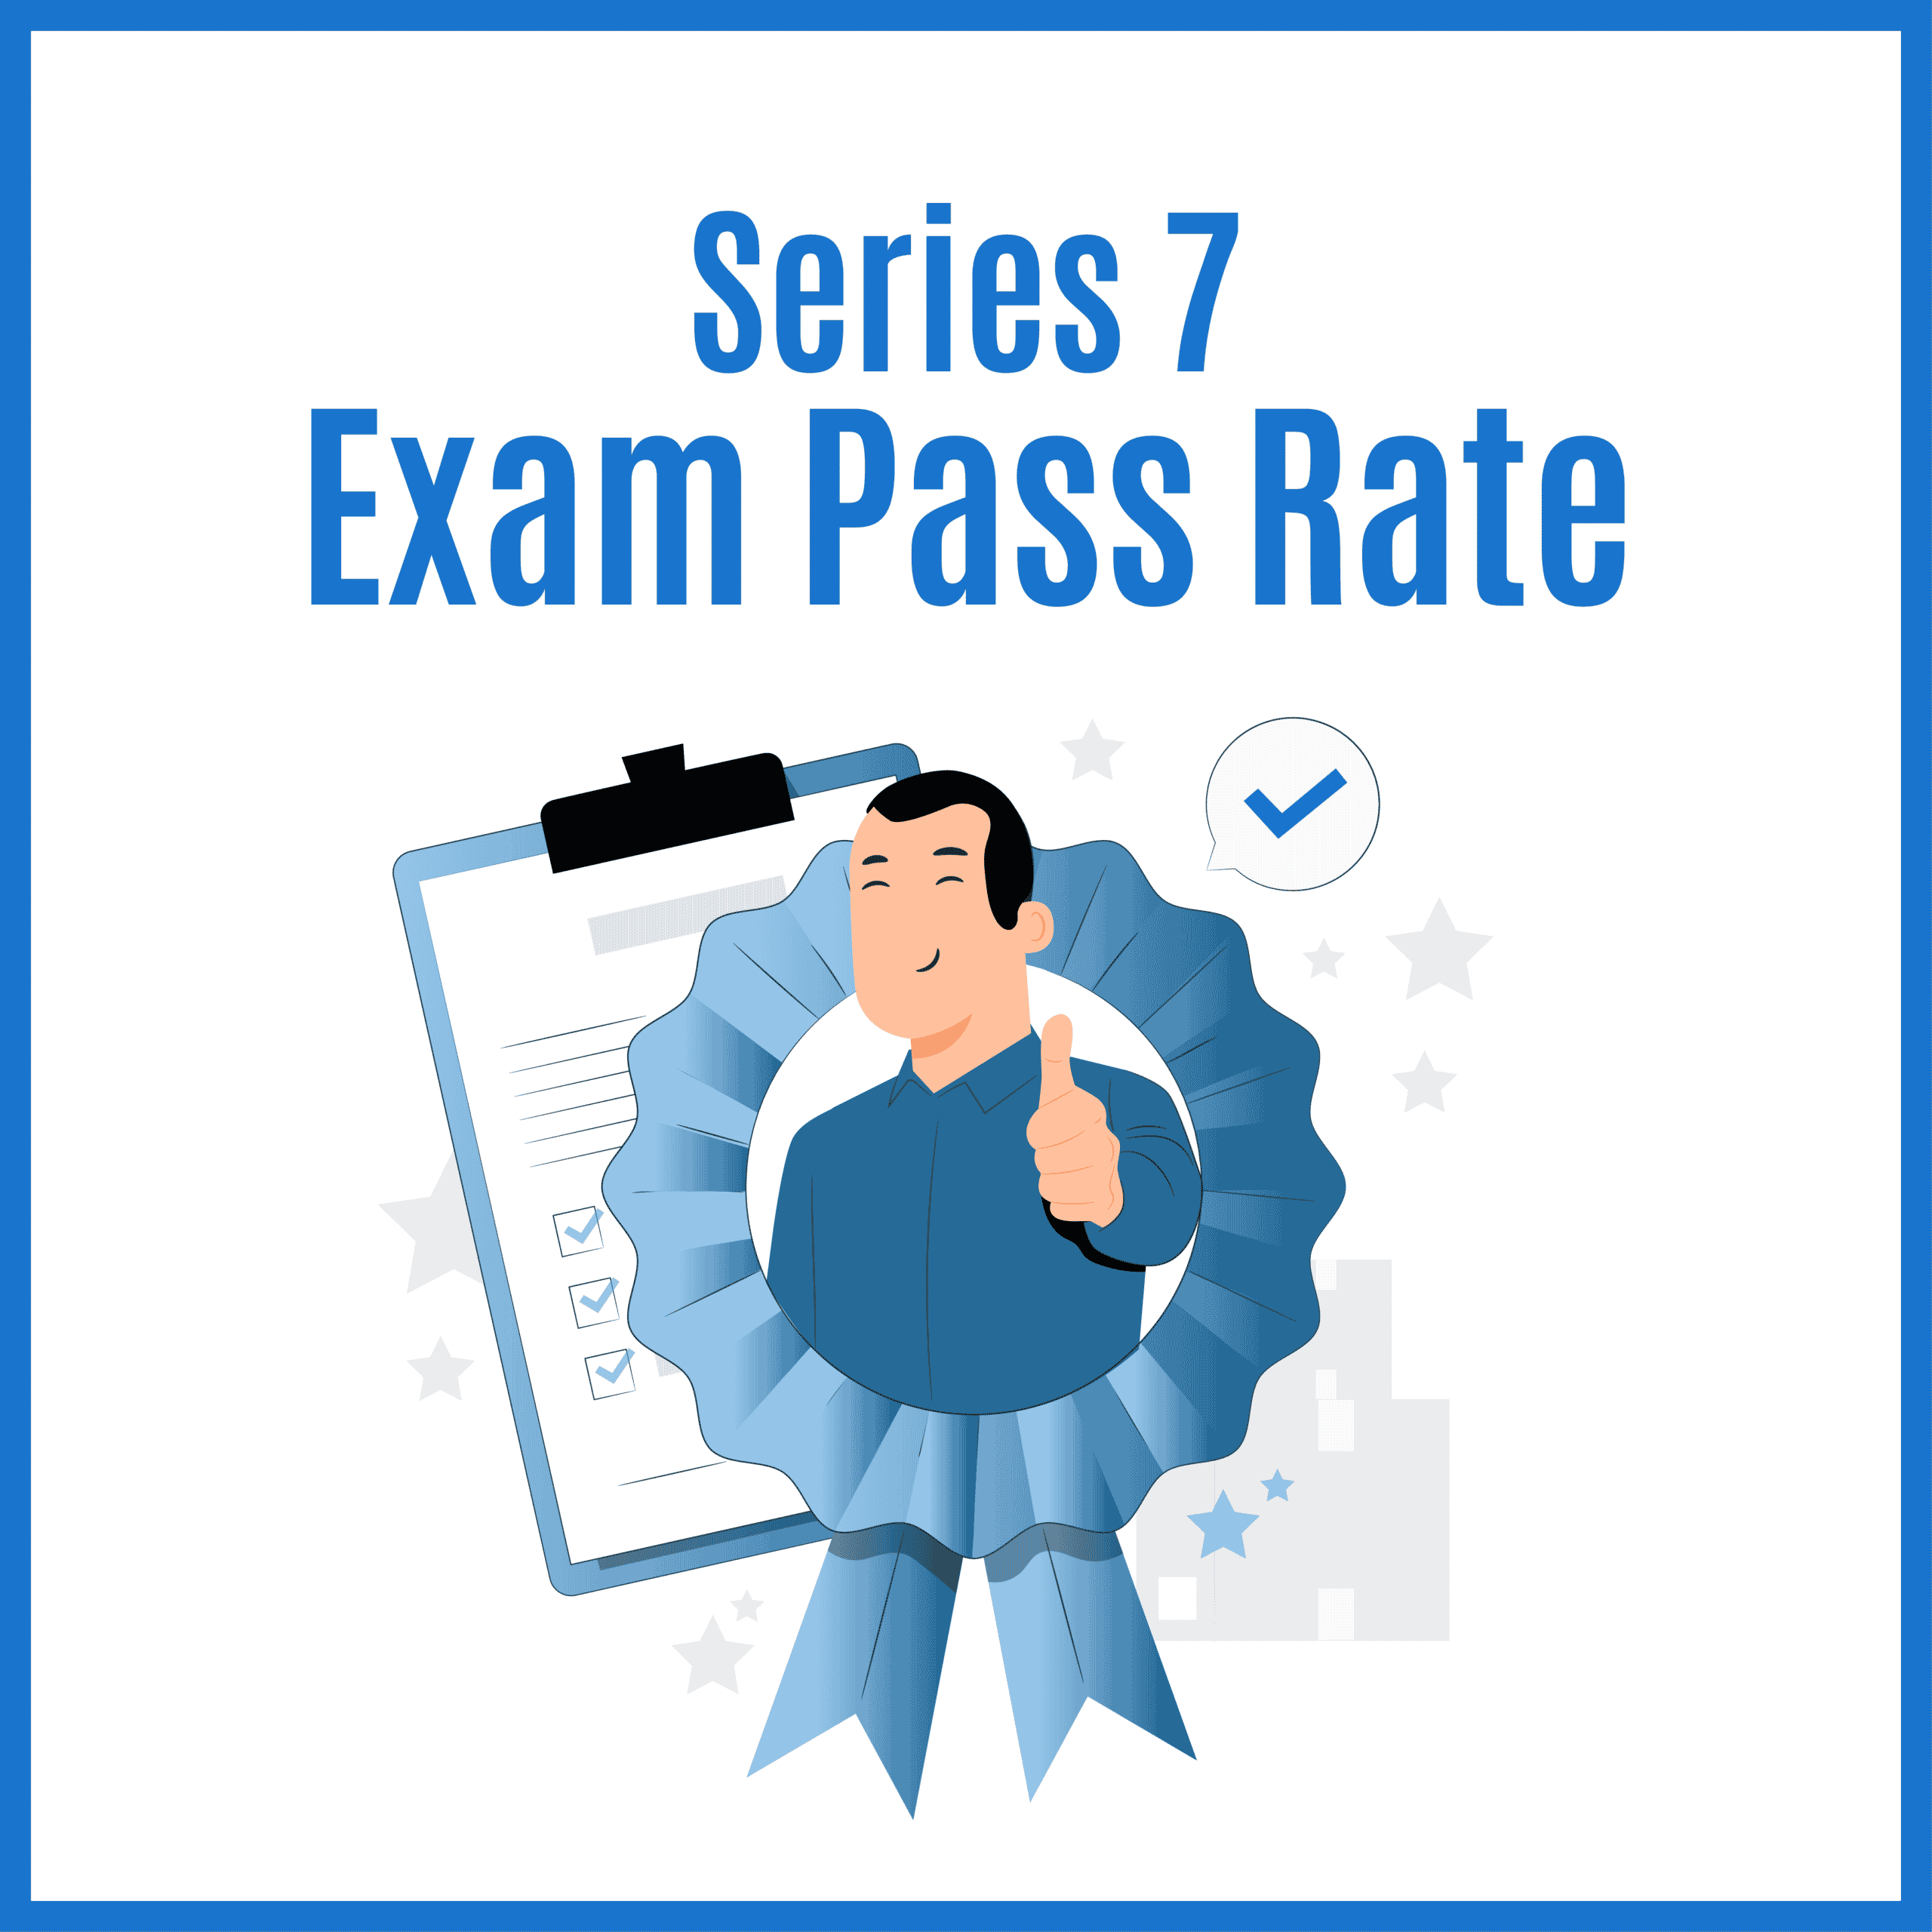 Series 7 Exam Pass Rate How Hard is the Series 7?